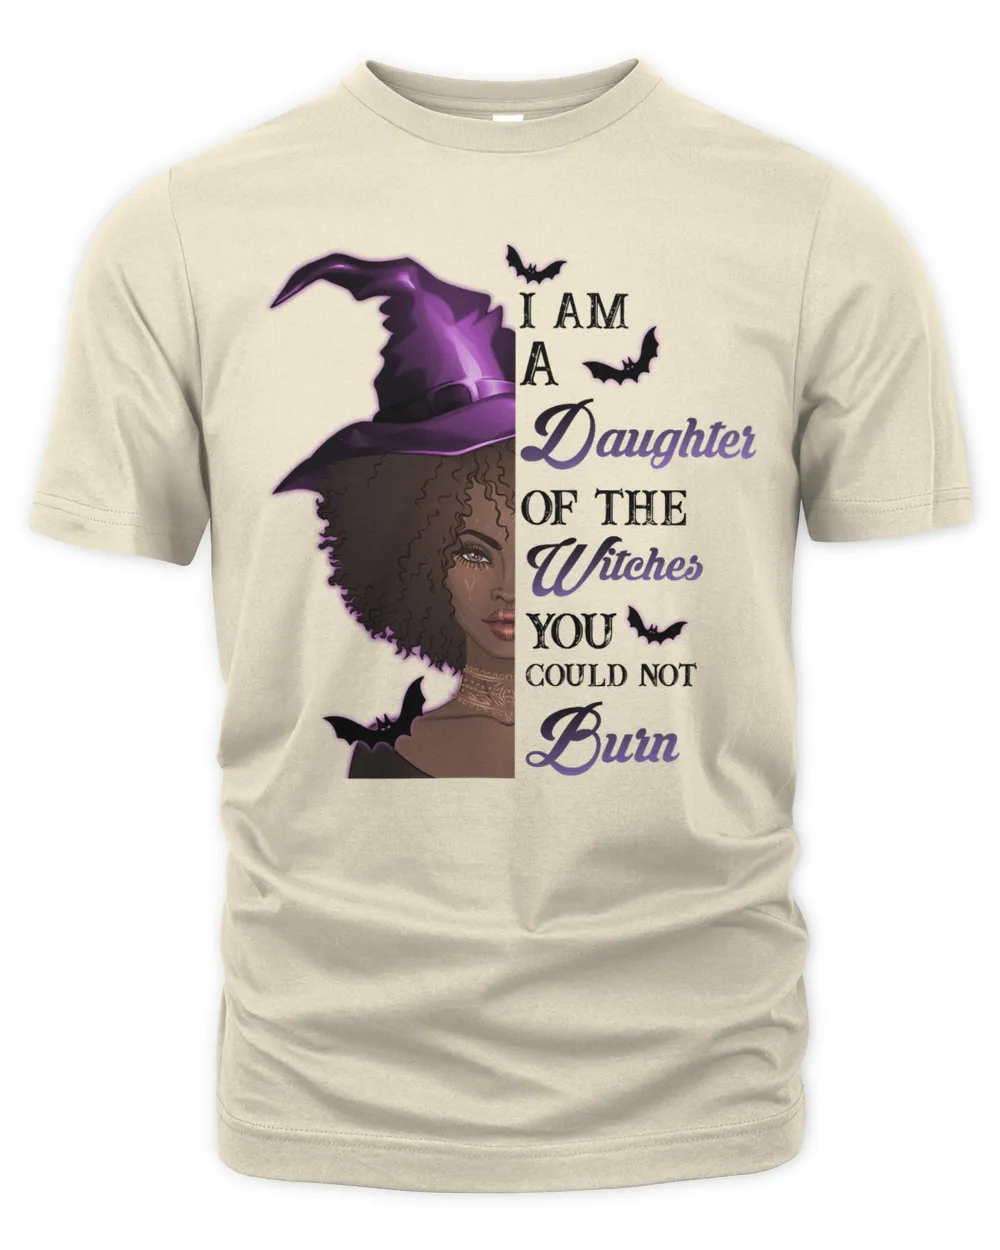 I'm A Daughter Of The Witches You Could Not Burn Shirt